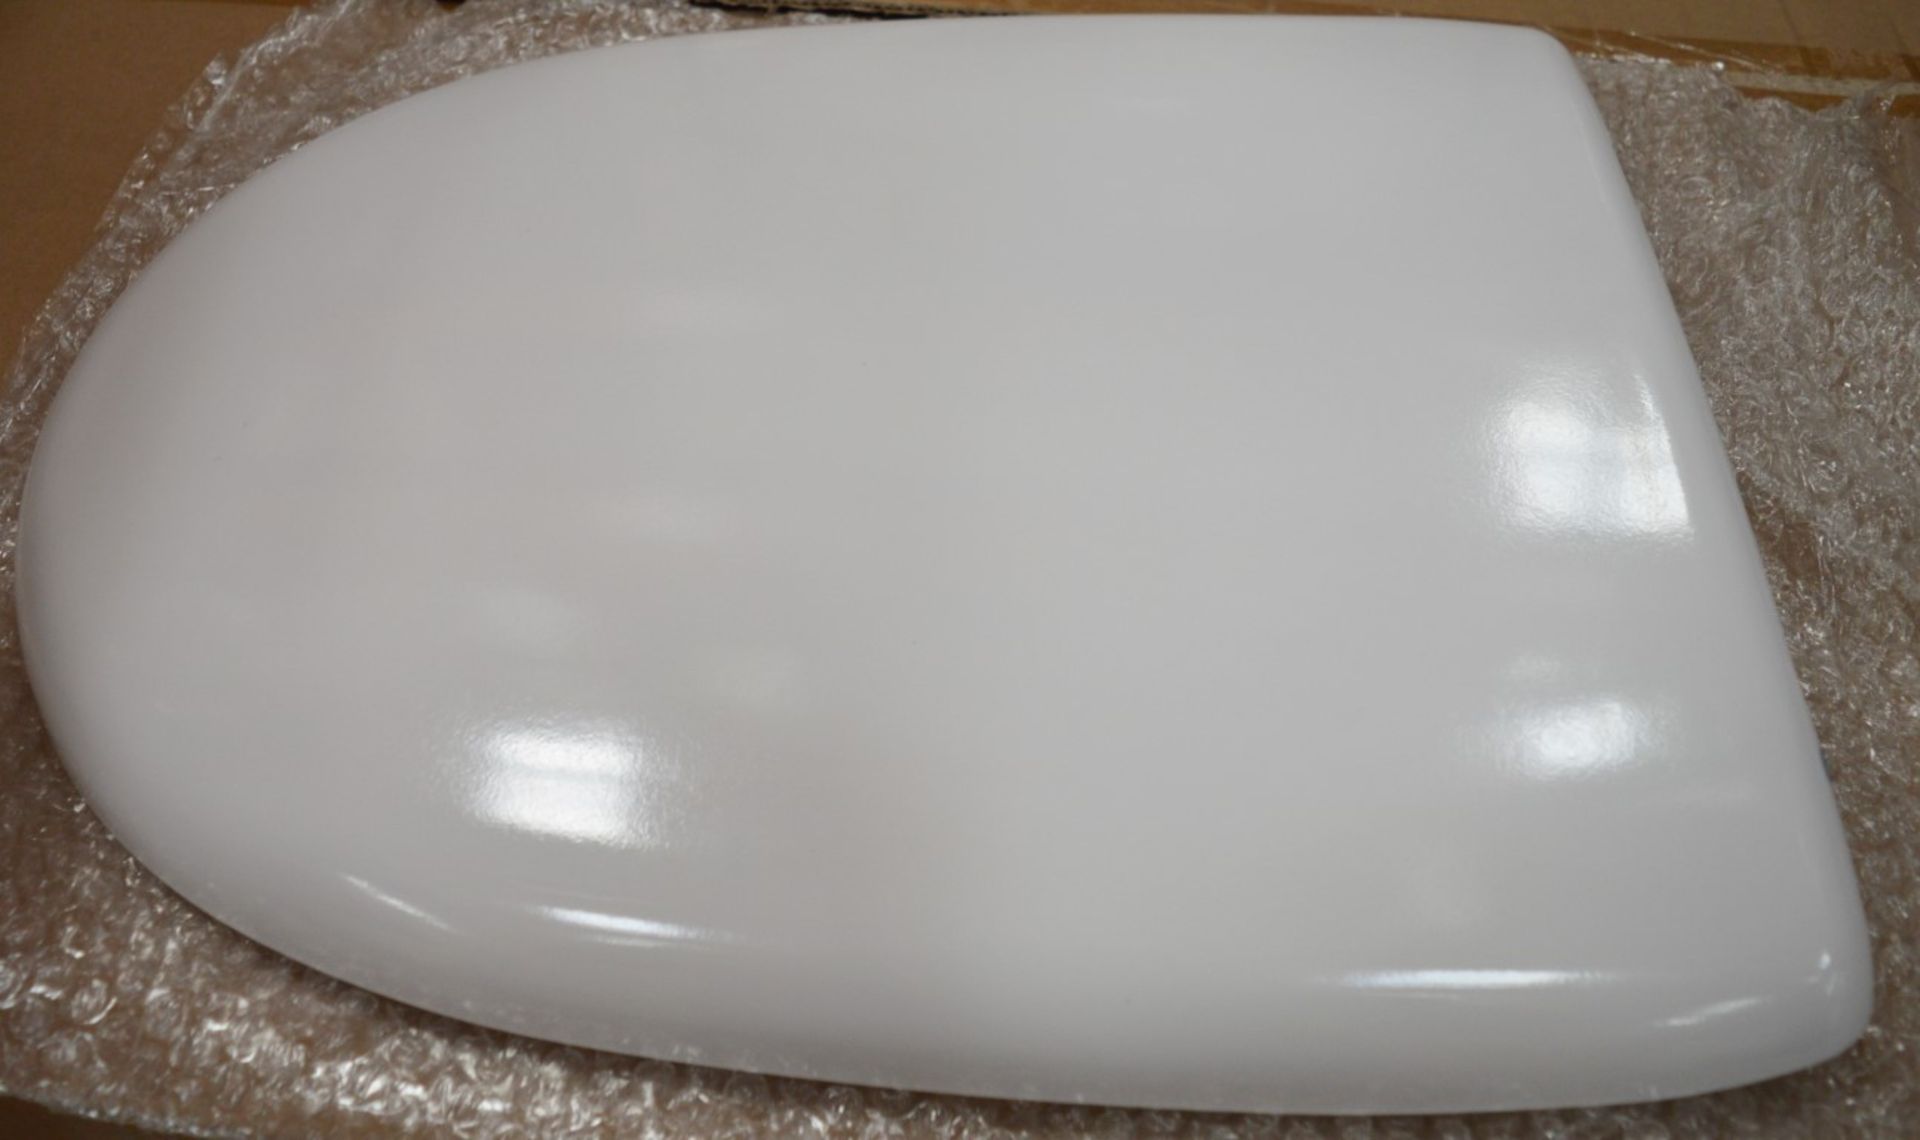 10 x Vogue Caprice Modern White Soft Close Toilet Seat and Cover Top Fixing - Brand New Boxed - Image 2 of 4